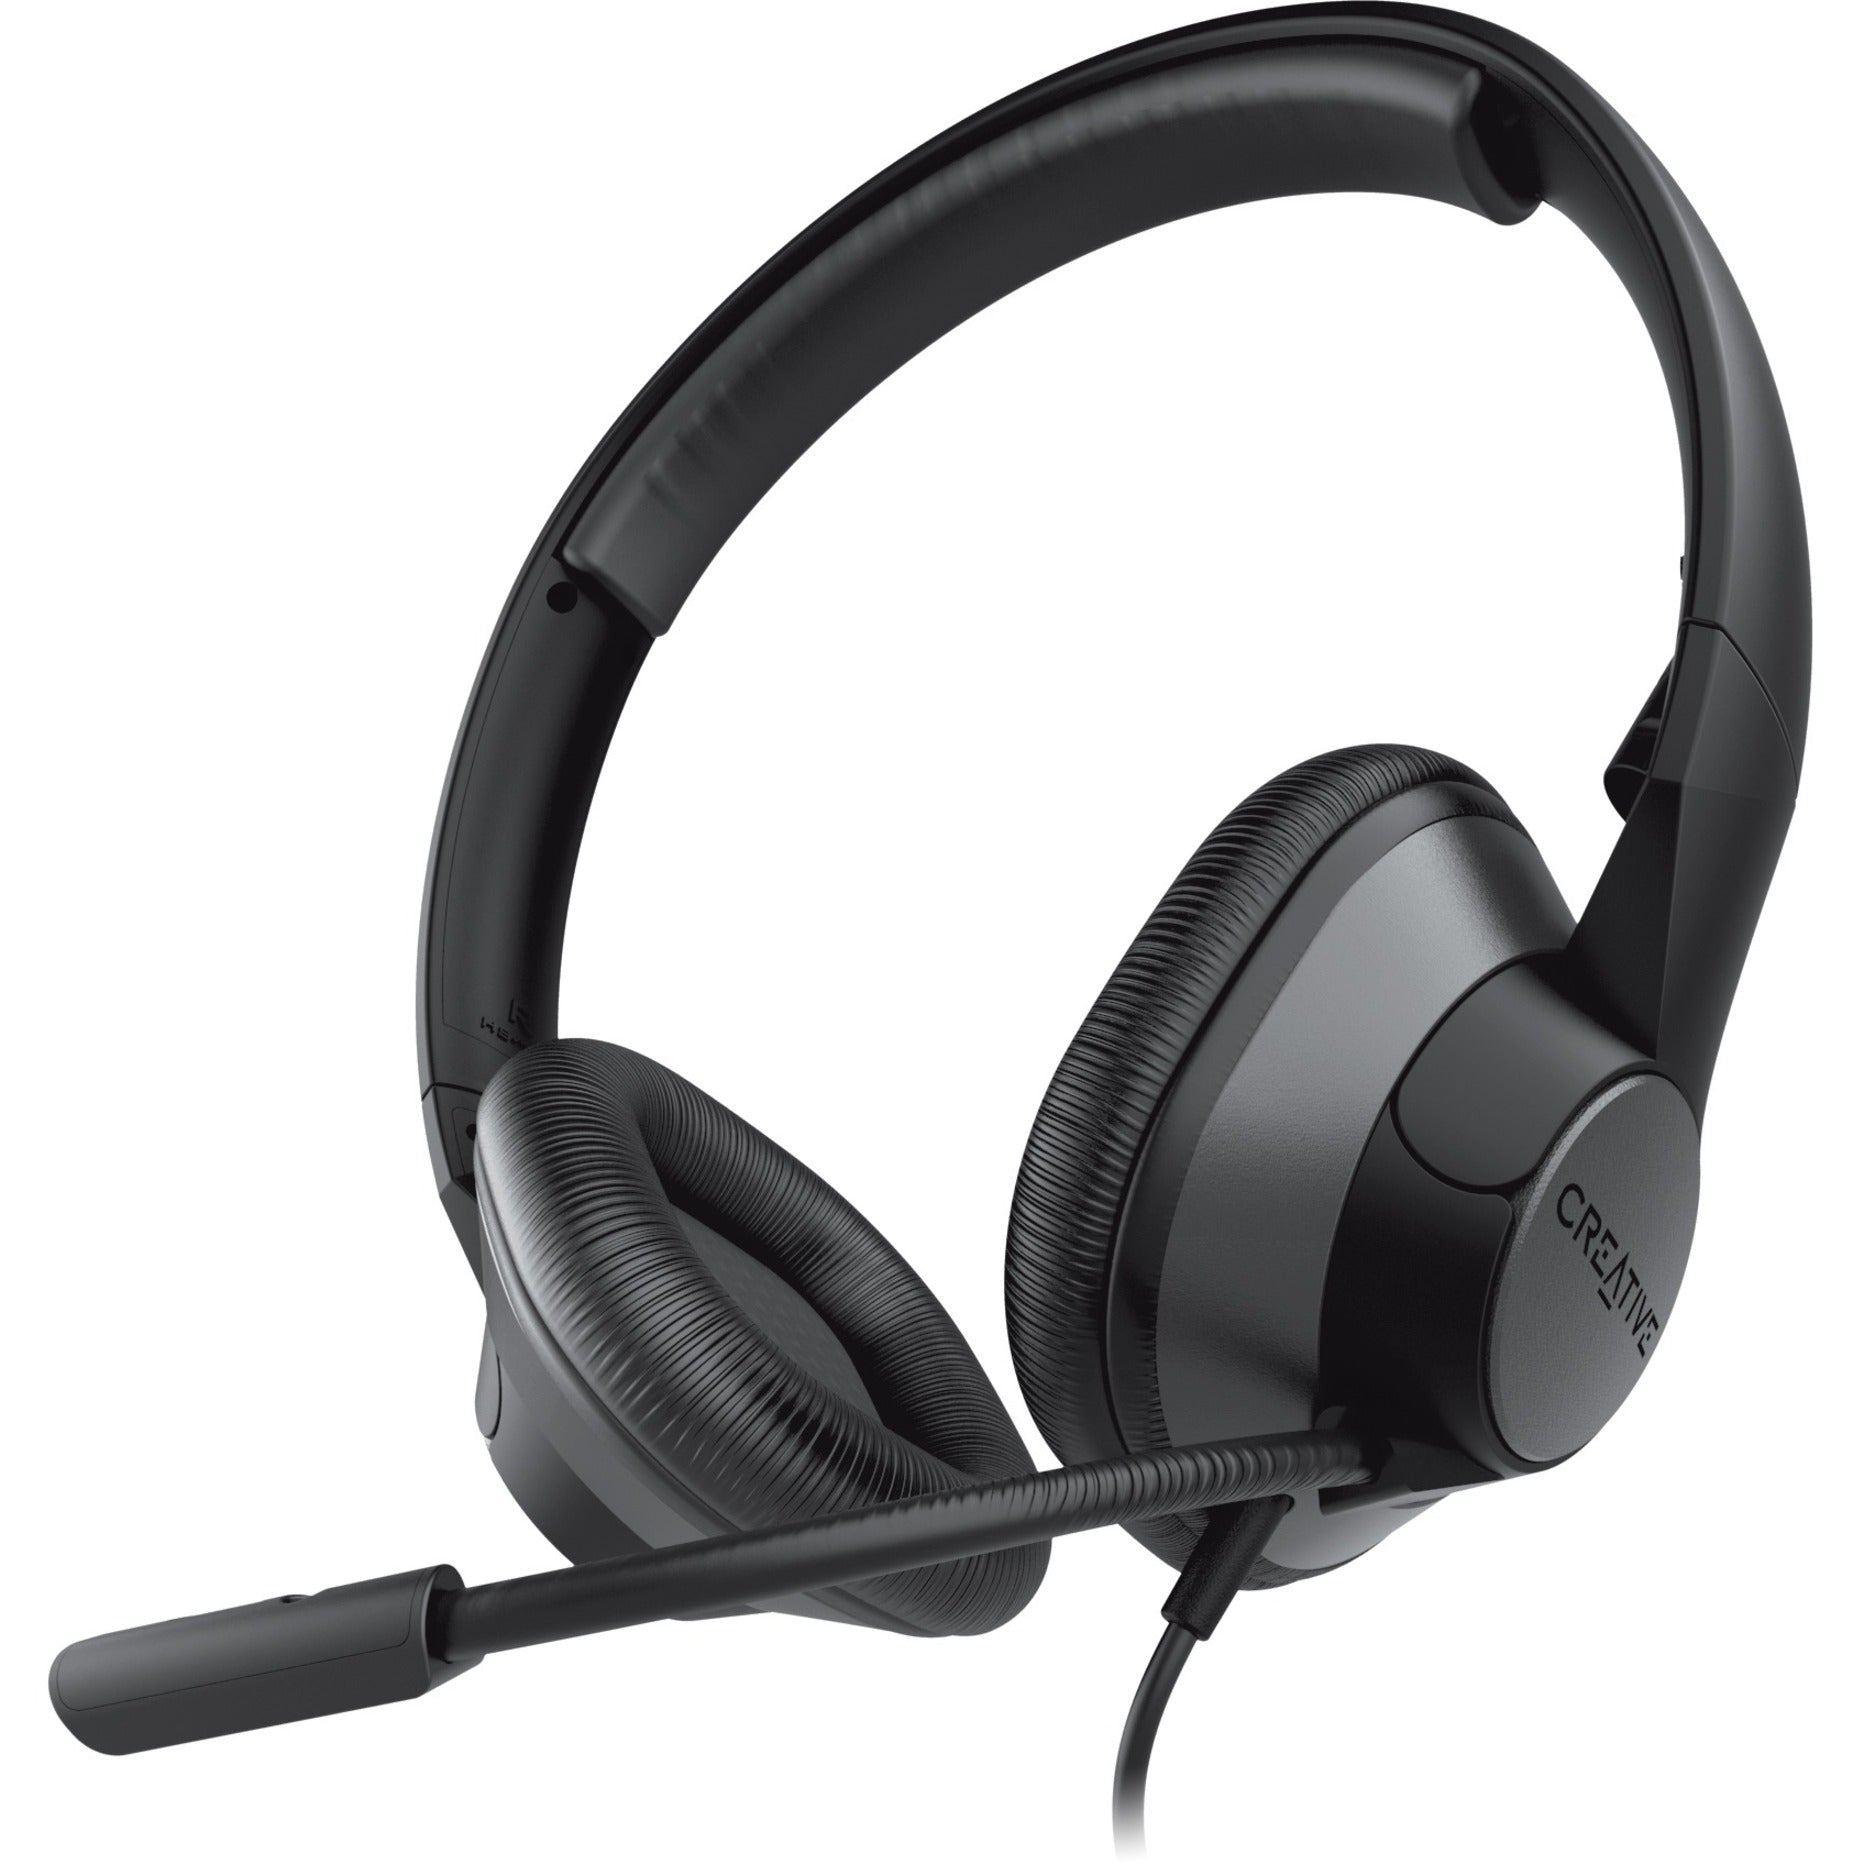 Creative 51EF0960AA000 HS-720 V2 Headset, USB On-ear Headset with Flexible Microphone, Noise Cancelling, Plug and Play